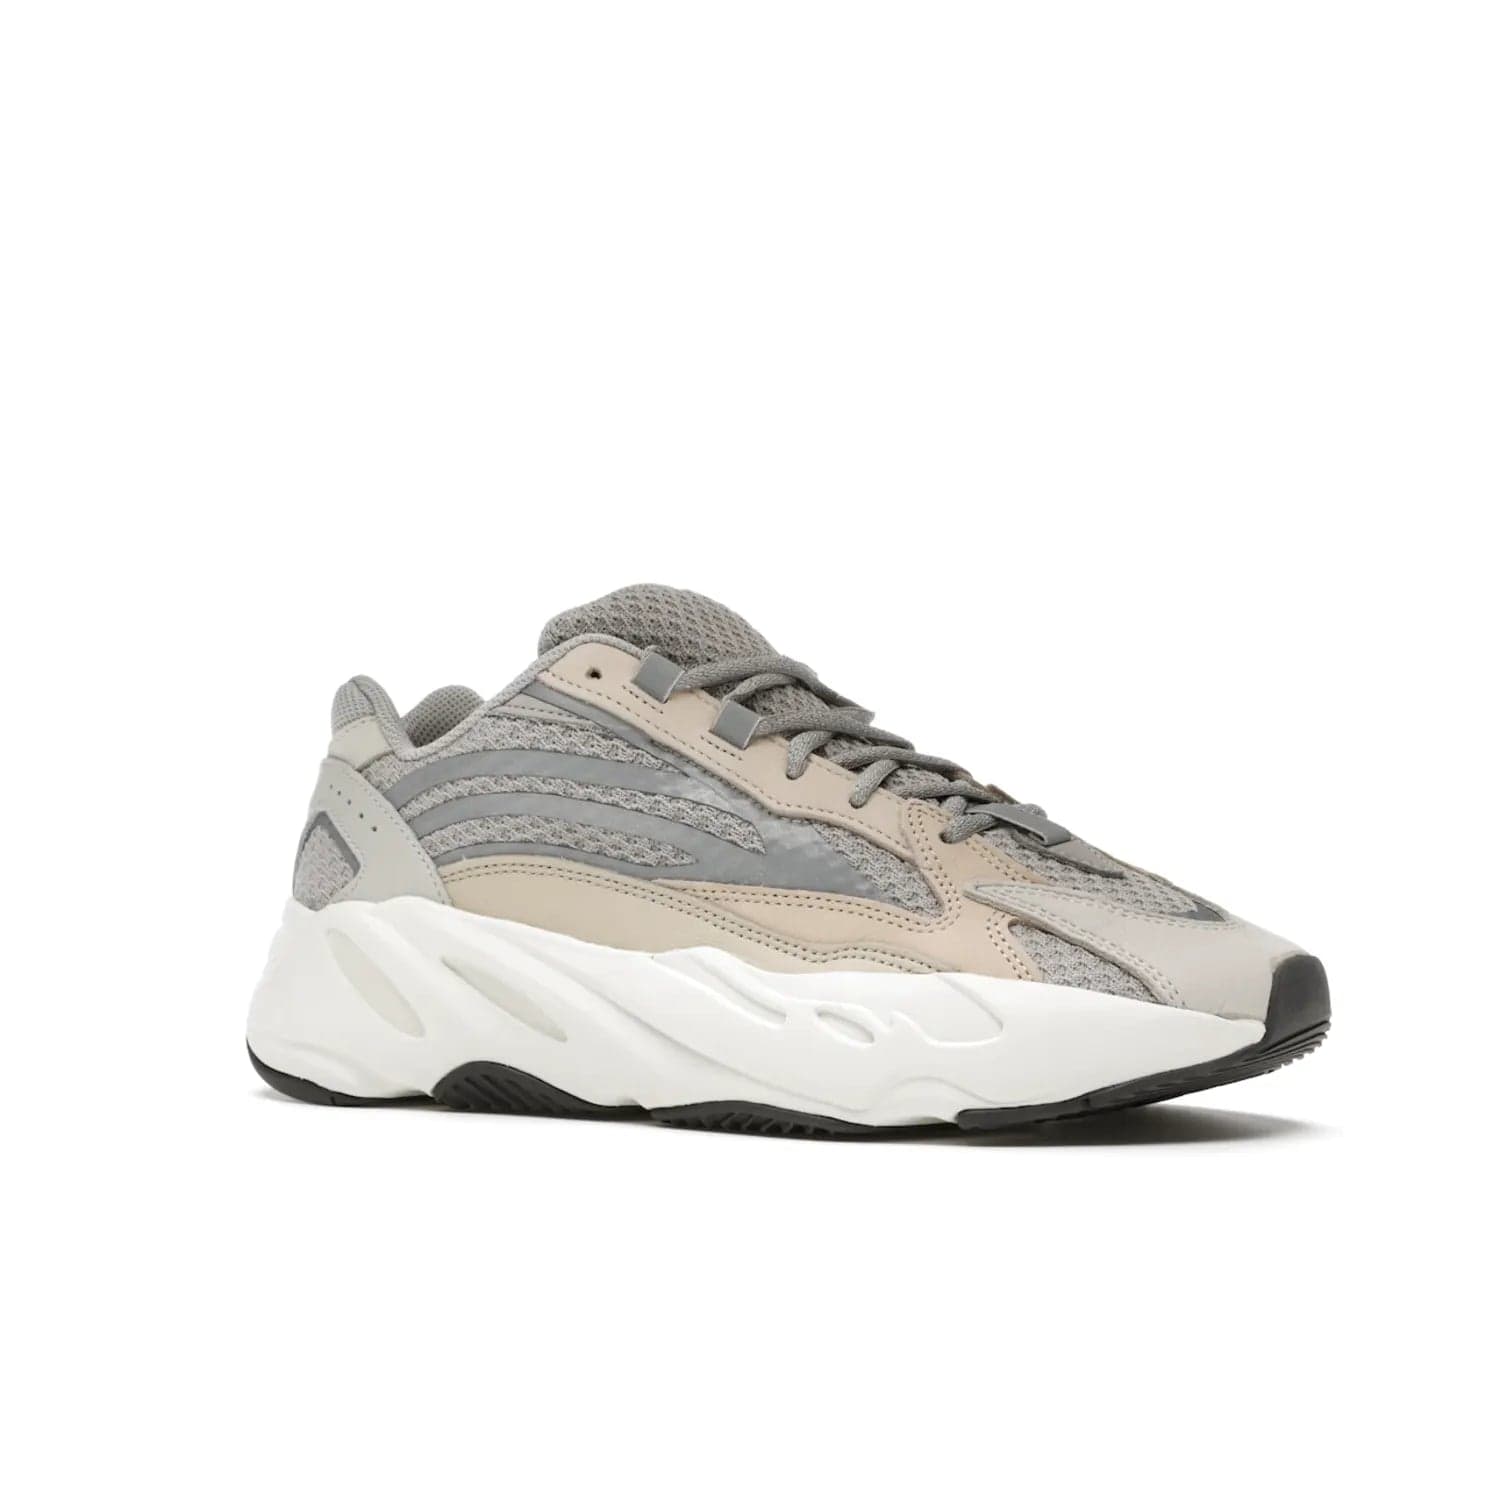 adidas Yeezy Boost 700 V2 Cream - Image 4 - Only at www.BallersClubKickz.com - Add style and luxury to your wardrobe with the adidas Yeezy 700 V2 Cream. Featuring a unique reflective upper, leather overlays, mesh underlays and the signature BOOST midsole, this silhouette is perfect for any stylish wardrobe.